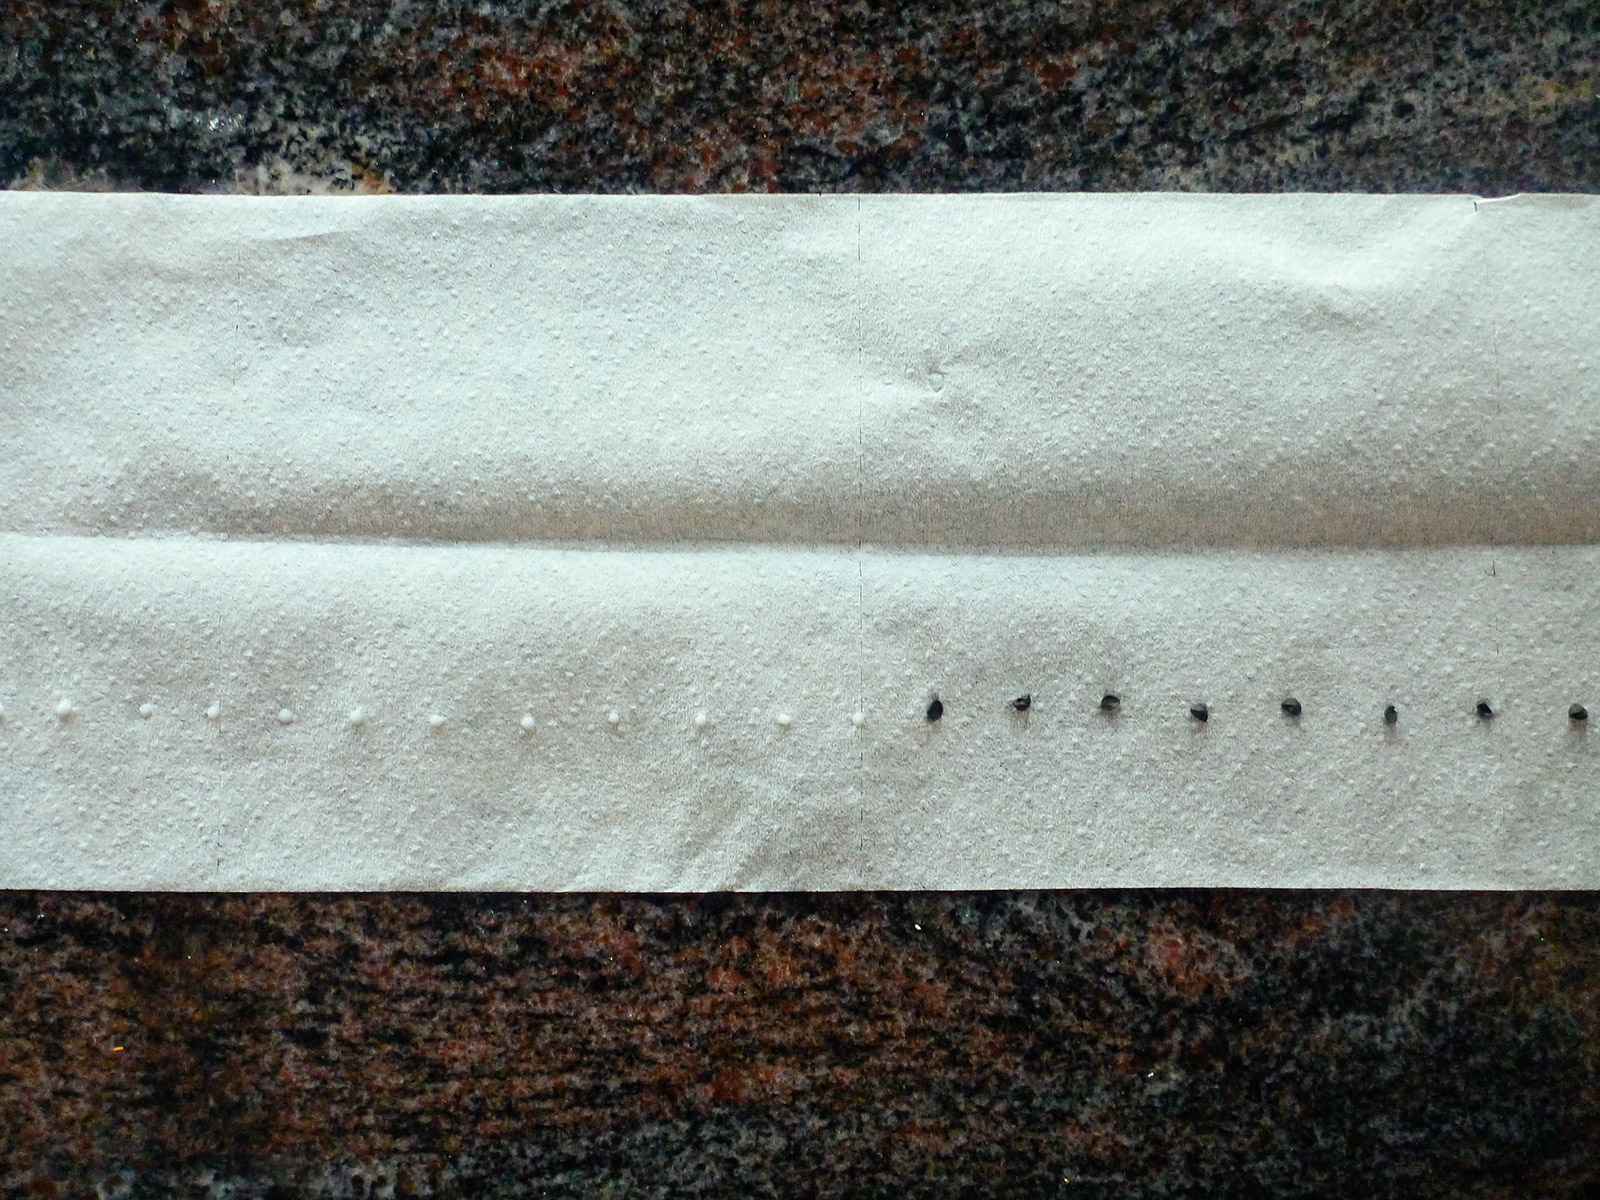 Onion seeds and glue dots lined up in a row on a strip of toilet paper